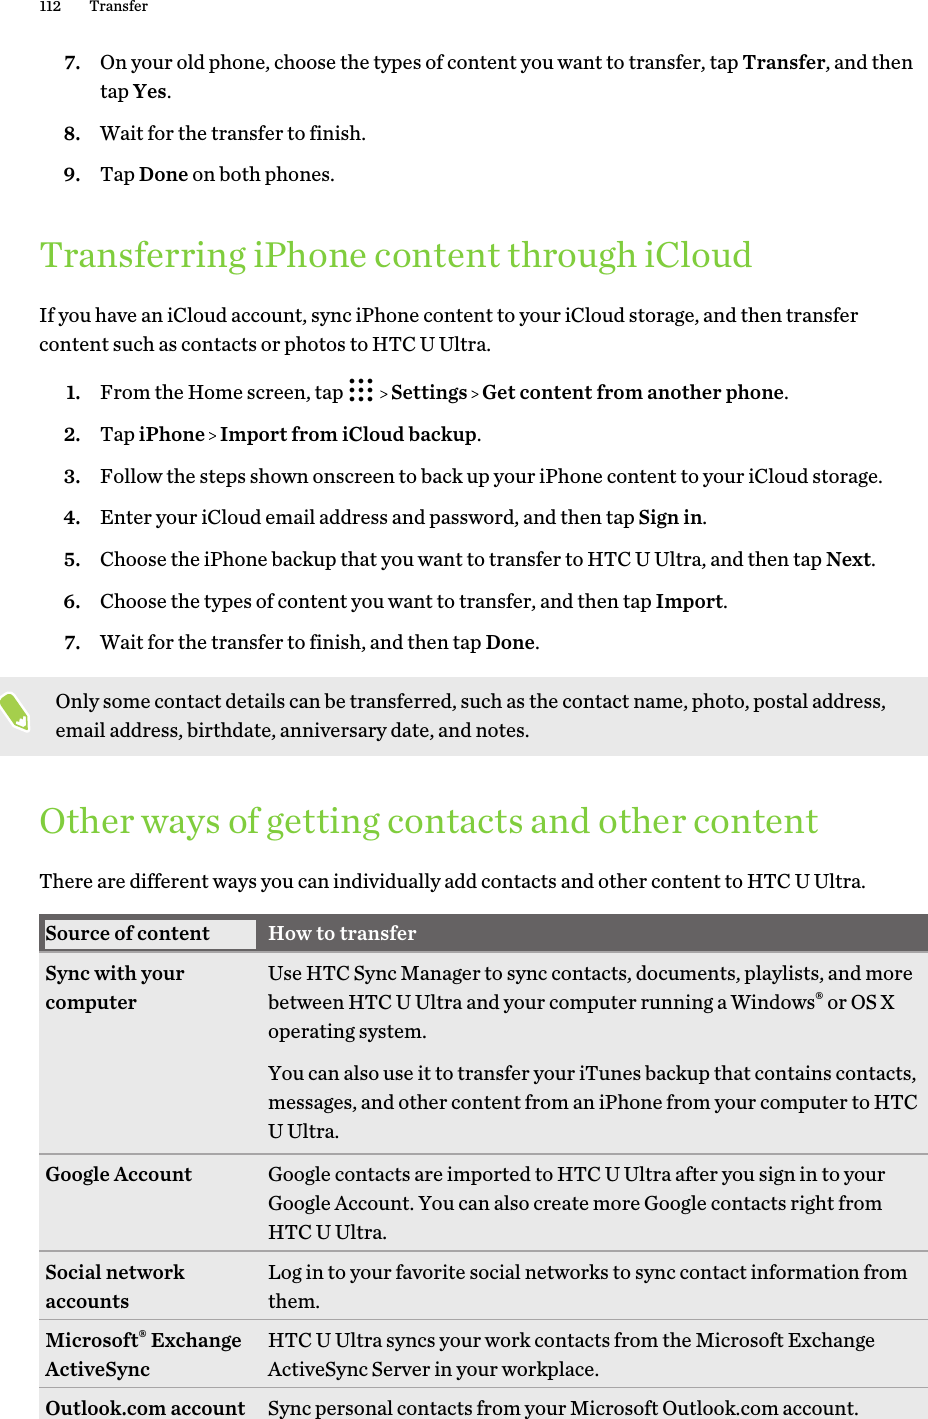 7. On your old phone, choose the types of content you want to transfer, tap Transfer, and thentap Yes.8. Wait for the transfer to finish.9. Tap Done on both phones.Transferring iPhone content through iCloudIf you have an iCloud account, sync iPhone content to your iCloud storage, and then transfercontent such as contacts or photos to HTC U Ultra.1. From the Home screen, tap     Settings   Get content from another phone.2. Tap iPhone   Import from iCloud backup.3. Follow the steps shown onscreen to back up your iPhone content to your iCloud storage.4. Enter your iCloud email address and password, and then tap Sign in.5. Choose the iPhone backup that you want to transfer to HTC U Ultra, and then tap Next.6. Choose the types of content you want to transfer, and then tap Import.7. Wait for the transfer to finish, and then tap Done.Only some contact details can be transferred, such as the contact name, photo, postal address,email address, birthdate, anniversary date, and notes.Other ways of getting contacts and other contentThere are different ways you can individually add contacts and other content to HTC U Ultra.Source of content How to transferSync with yourcomputer Use HTC Sync Manager to sync contacts, documents, playlists, and morebetween HTC U Ultra and your computer running a Windows® or OS Xoperating system.You can also use it to transfer your iTunes backup that contains contacts,messages, and other content from an iPhone from your computer to HTCU Ultra.Google Account Google contacts are imported to HTC U Ultra after you sign in to yourGoogle Account. You can also create more Google contacts right fromHTC U Ultra.Social networkaccounts Log in to your favorite social networks to sync contact information fromthem.Microsoft® ExchangeActiveSync HTC U Ultra syncs your work contacts from the Microsoft ExchangeActiveSync Server in your workplace.Outlook.com account Sync personal contacts from your Microsoft Outlook.com account.112 Transfer